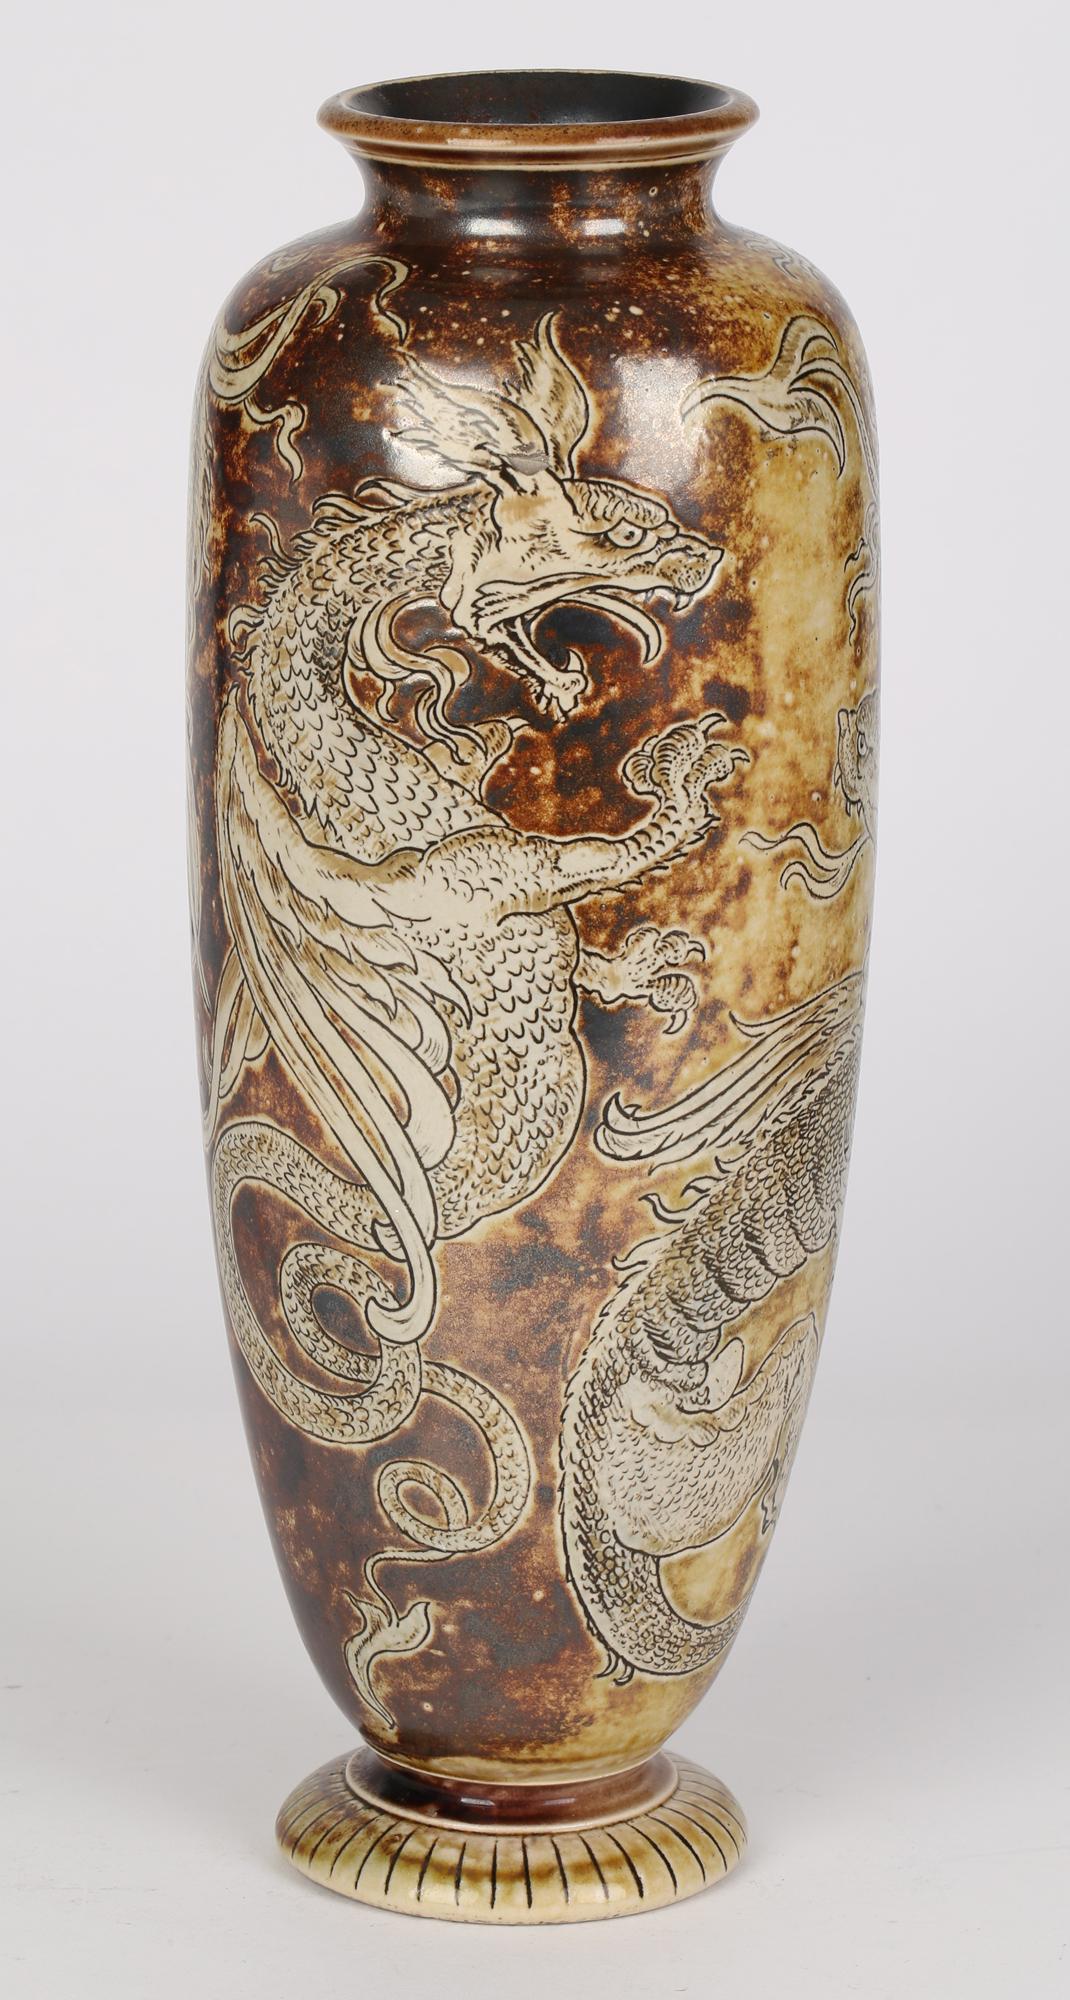 Robert Wallace Martin for Martin Brothers Stoneware Duelling Dragons Vase 1896 For Sale 8